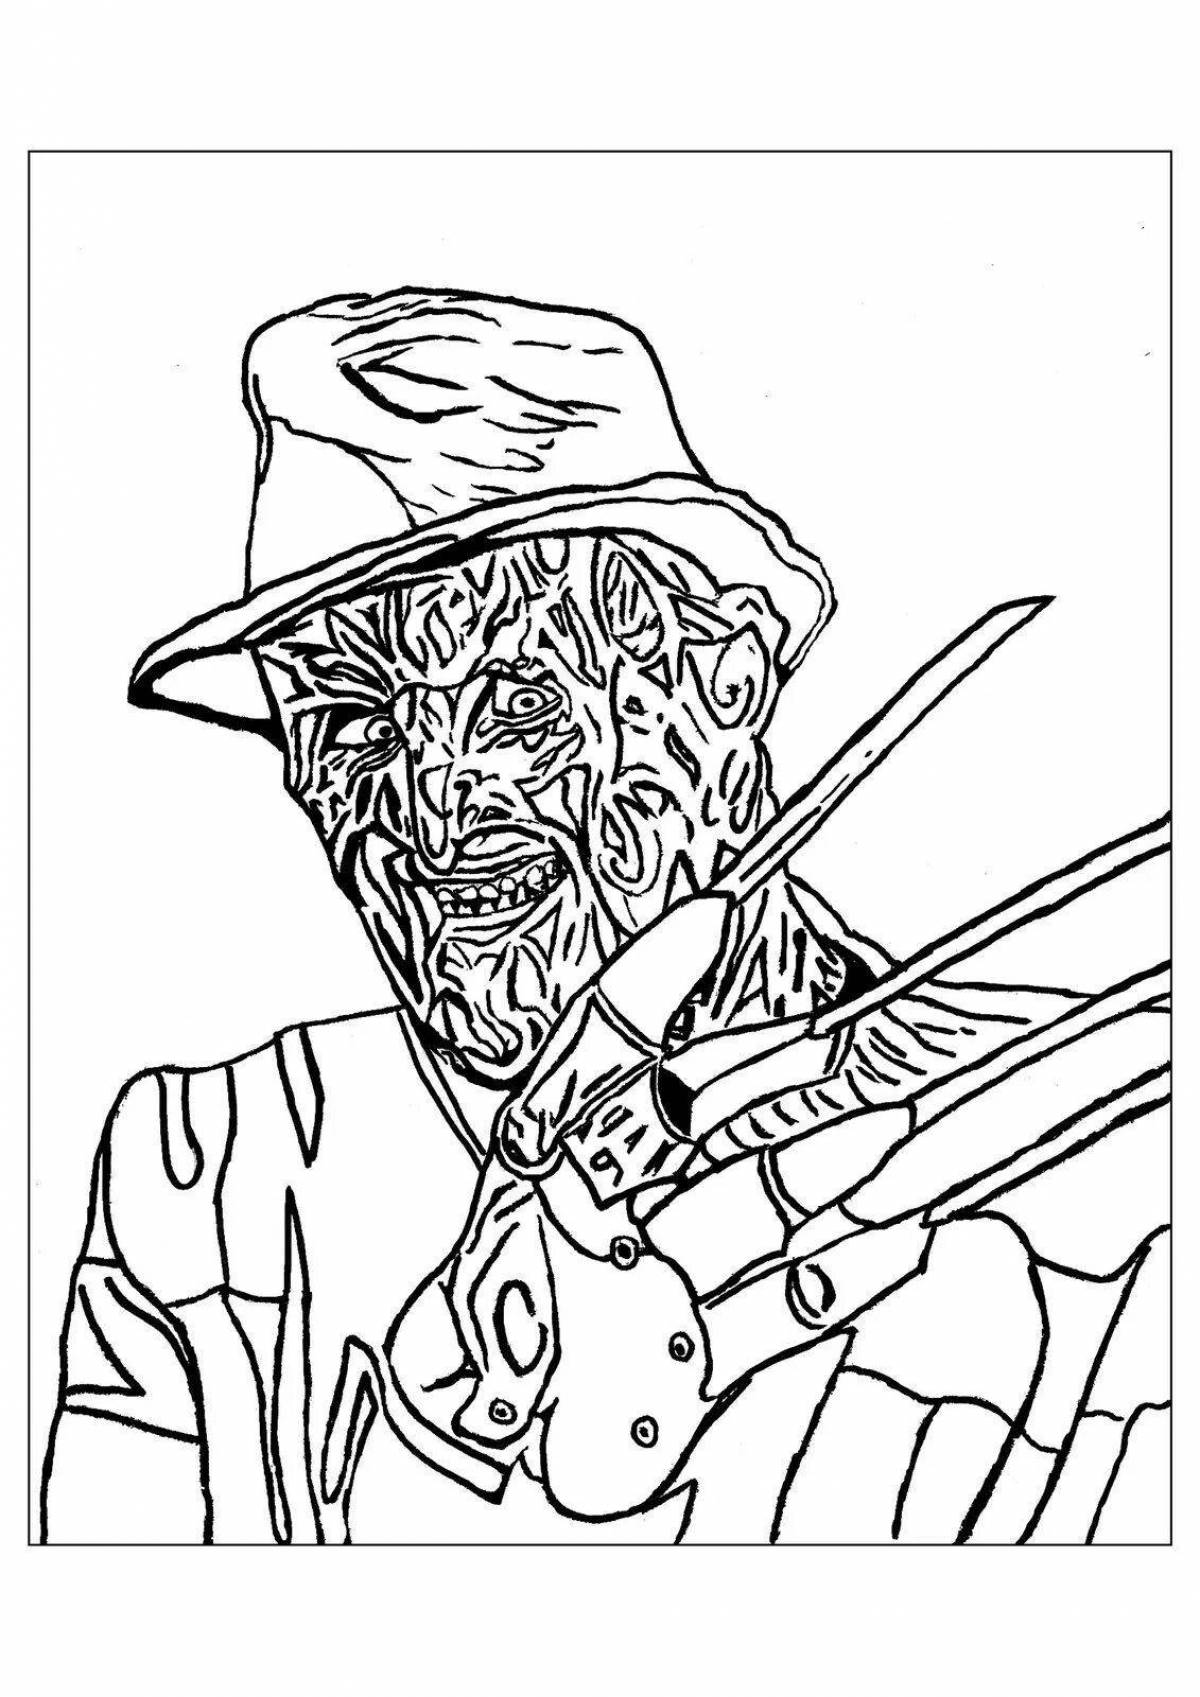 Sinister Freddy Krueger coloring page